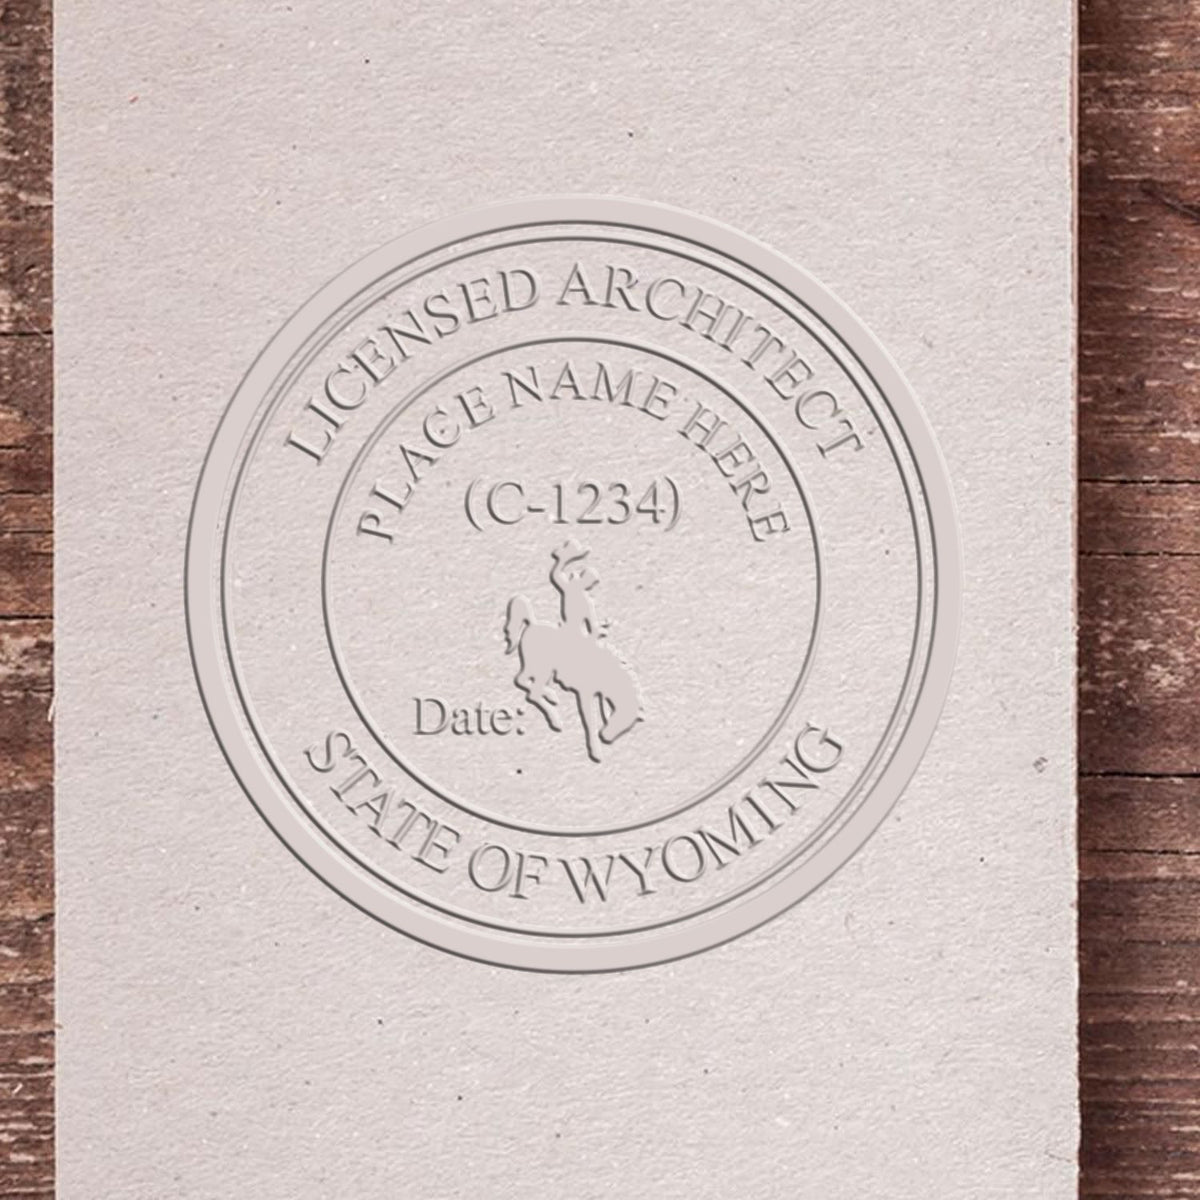 A stamped impression of the State of Wyoming Architectural Seal Embosser in this stylish lifestyle photo, setting the tone for a unique and personalized product.